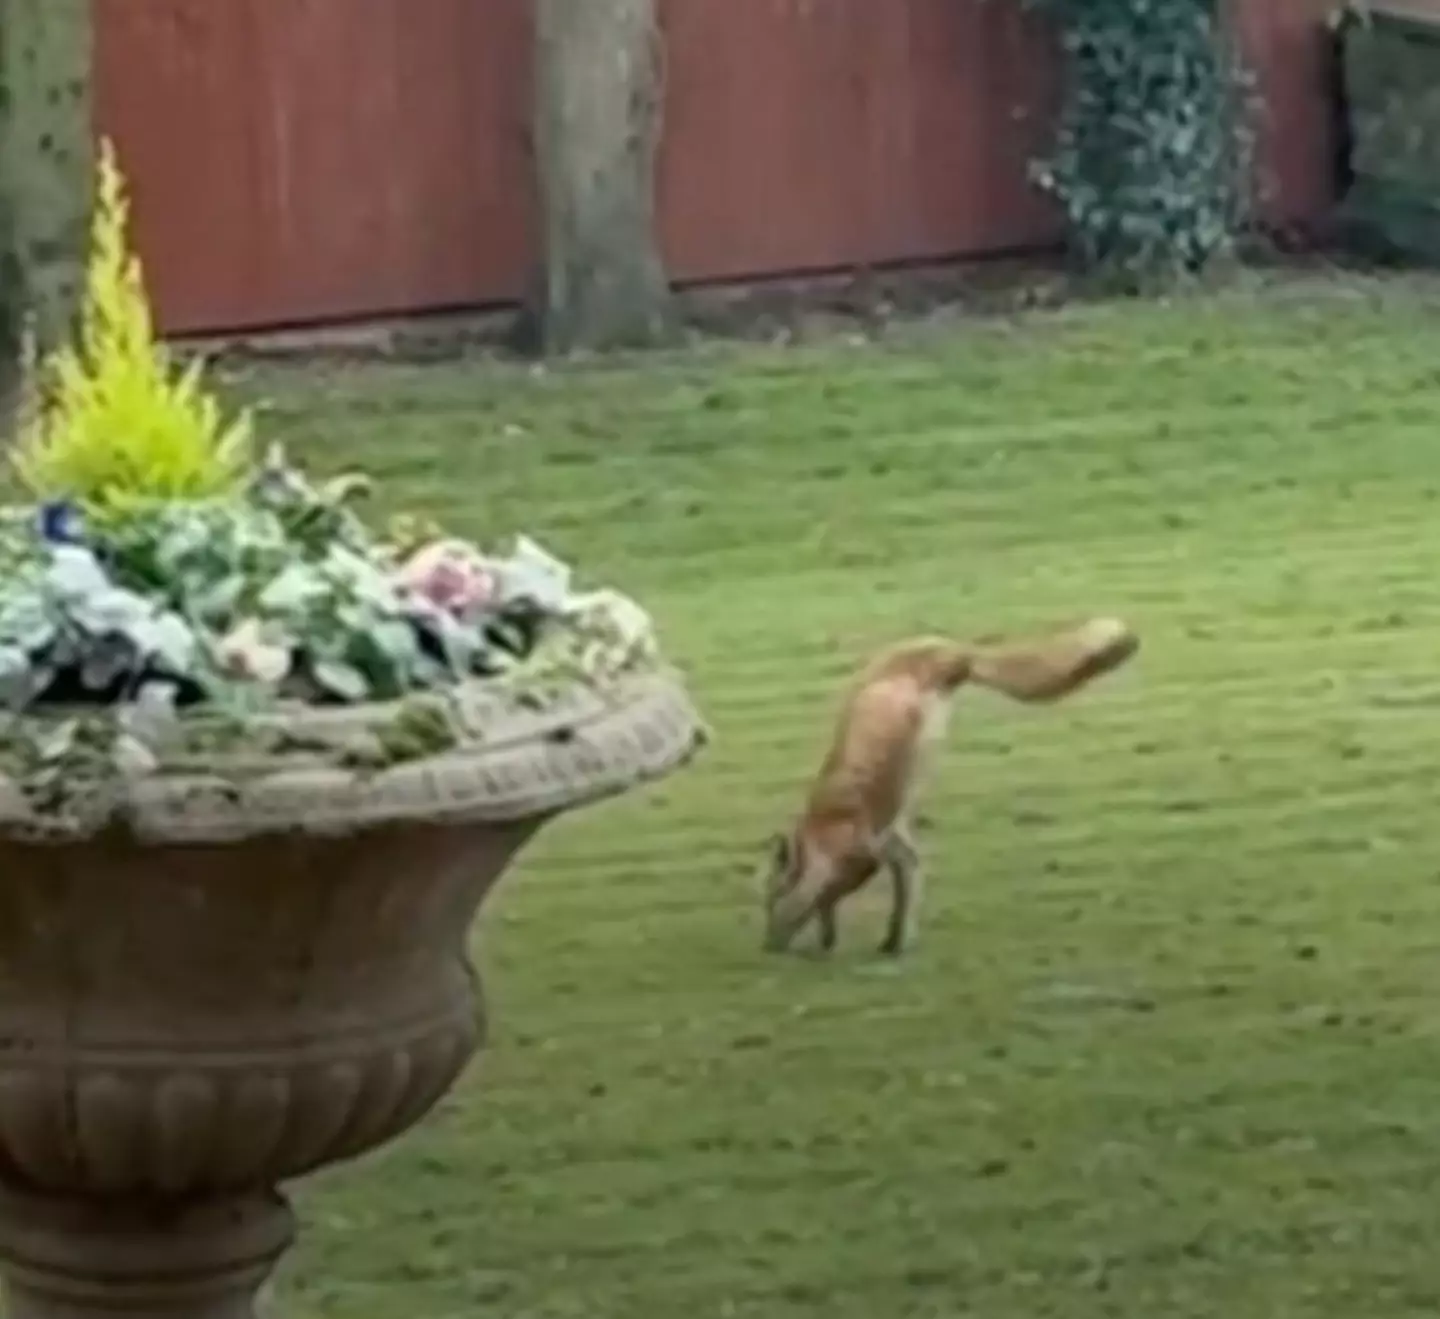 It turns out that there's at least one two-legged fox in the world.